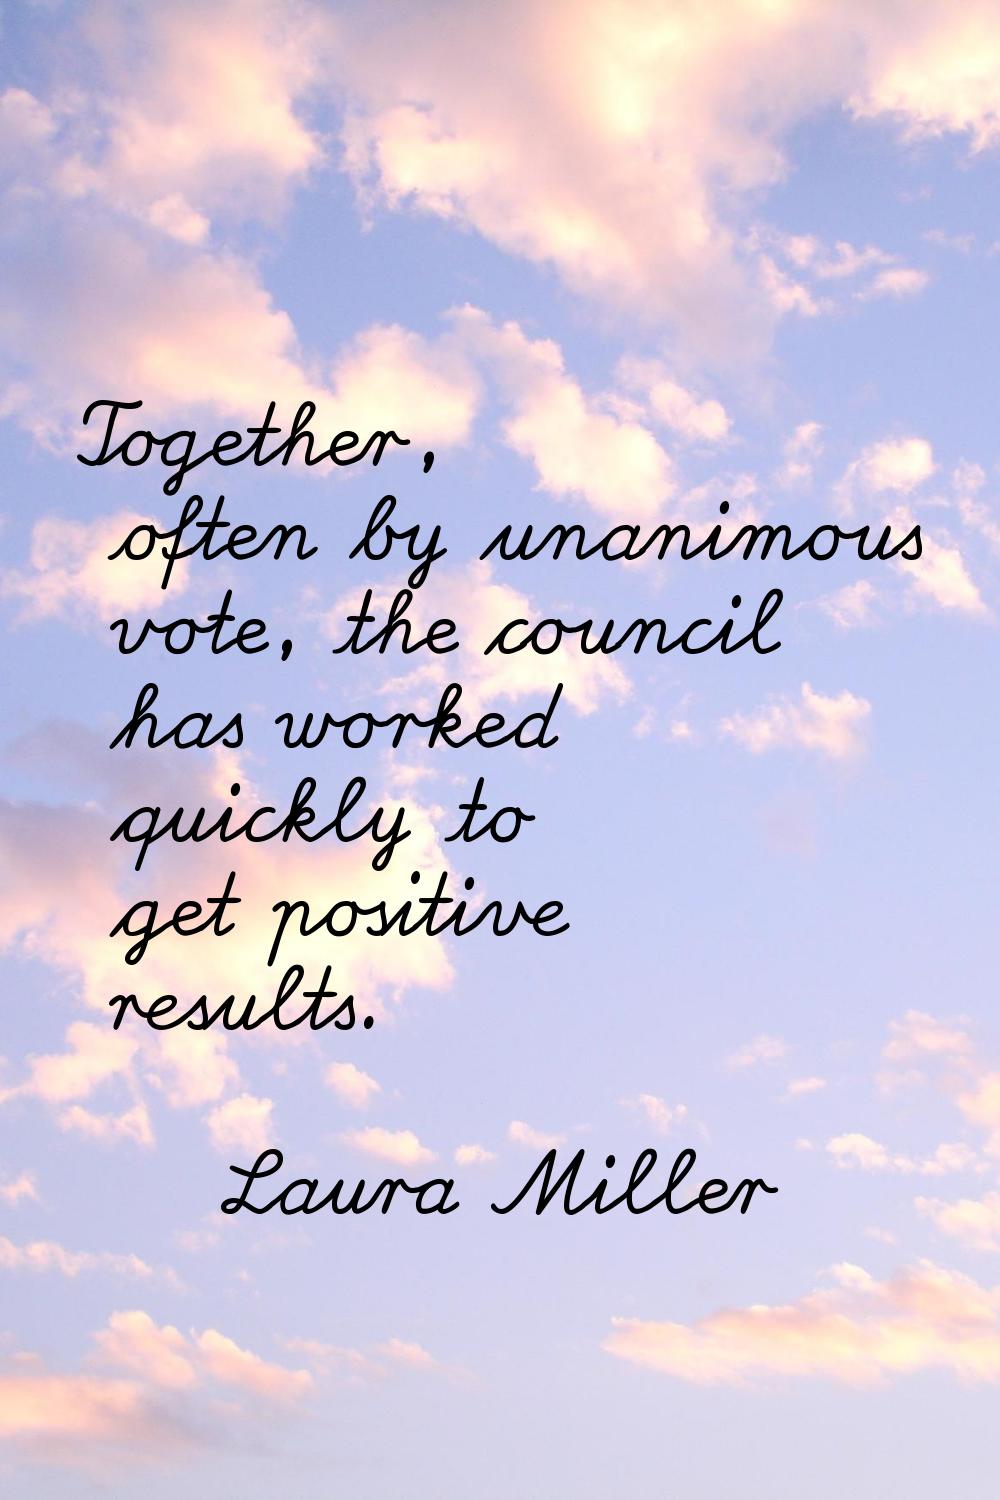 Together, often by unanimous vote, the council has worked quickly to get positive results.